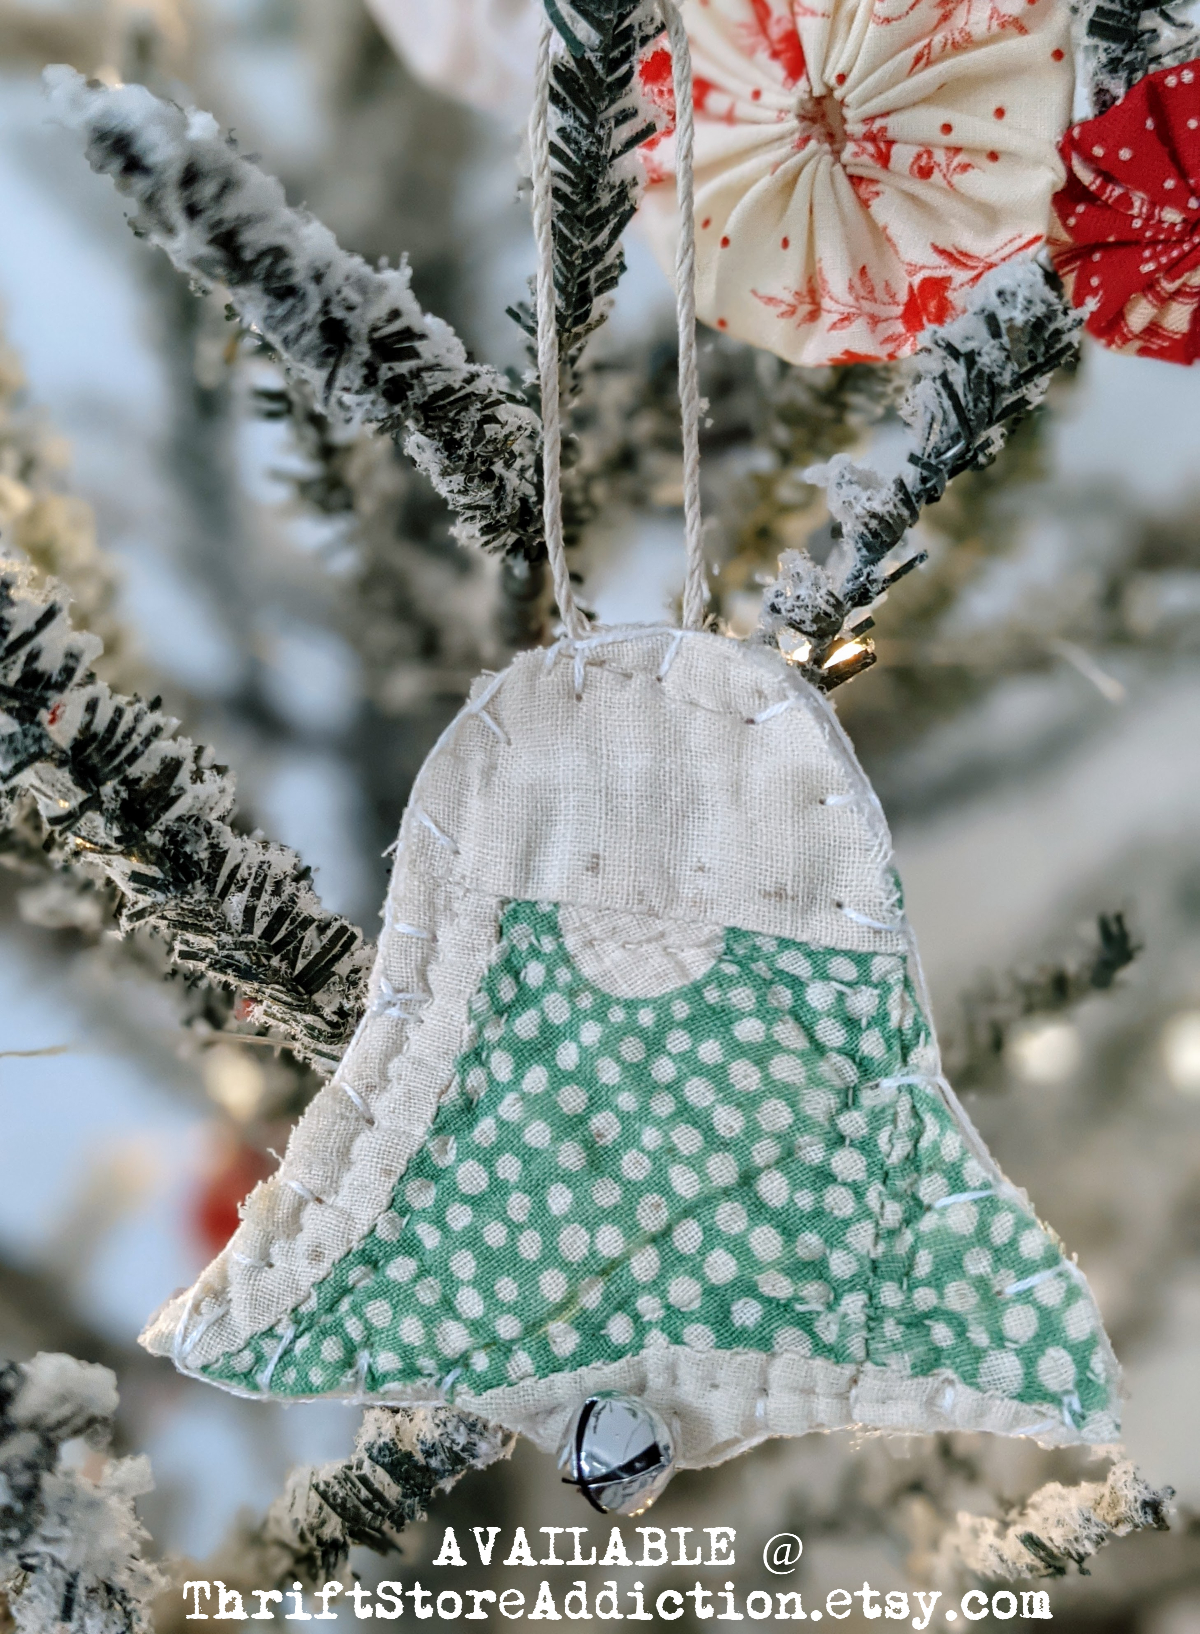 Handmade quilted Christmas ornaments